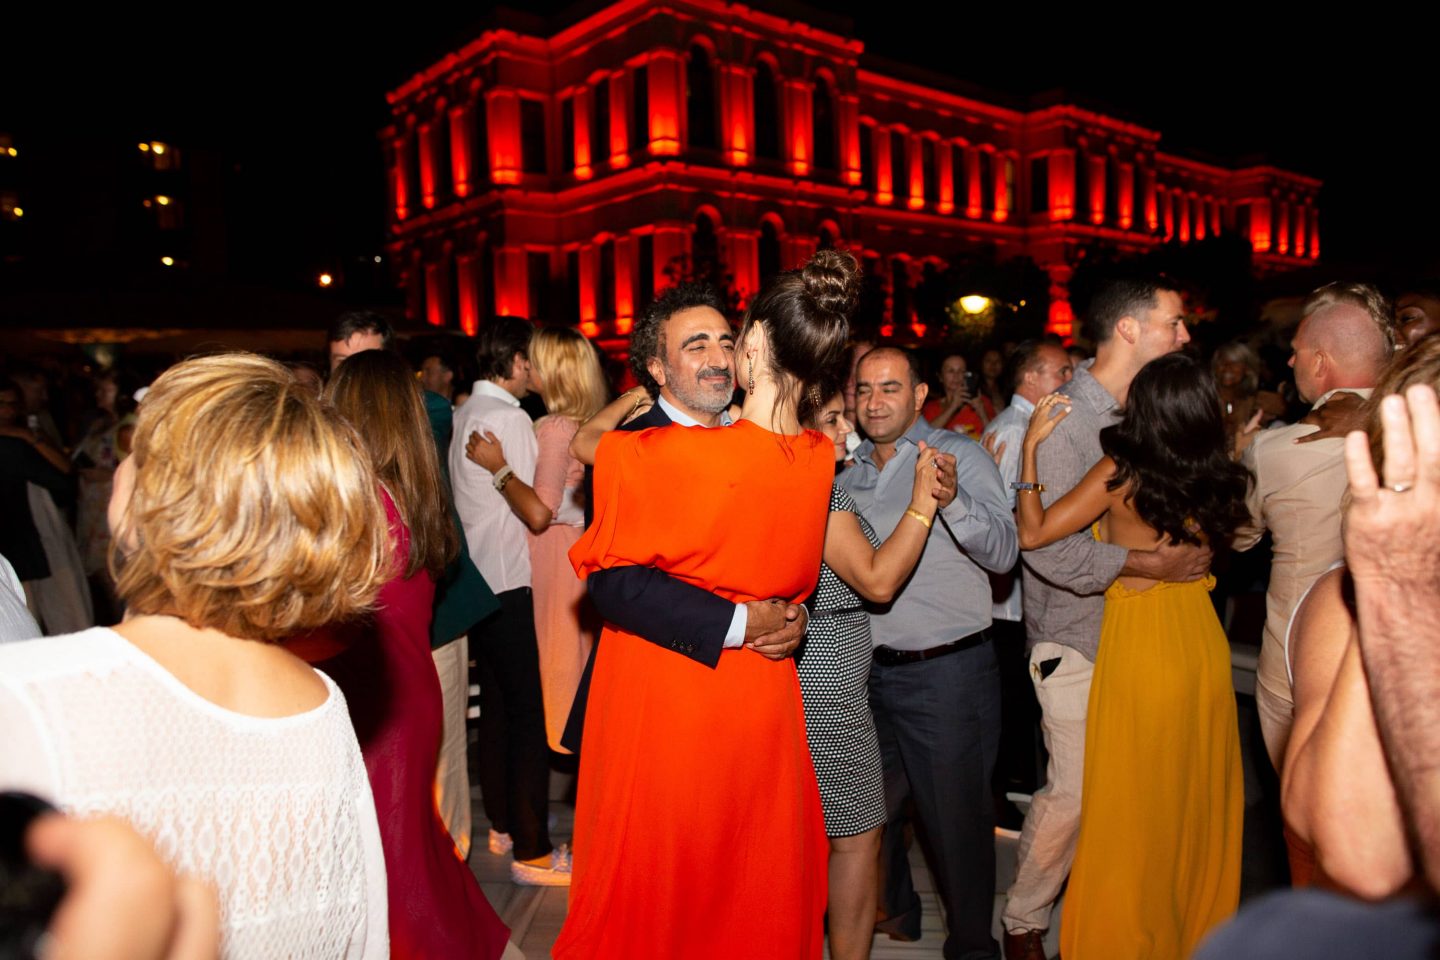 Dancing during the welcome party at this Istanbul wedding weekend at Four Seasons Bosphorus | Photo by Allan Zepeda